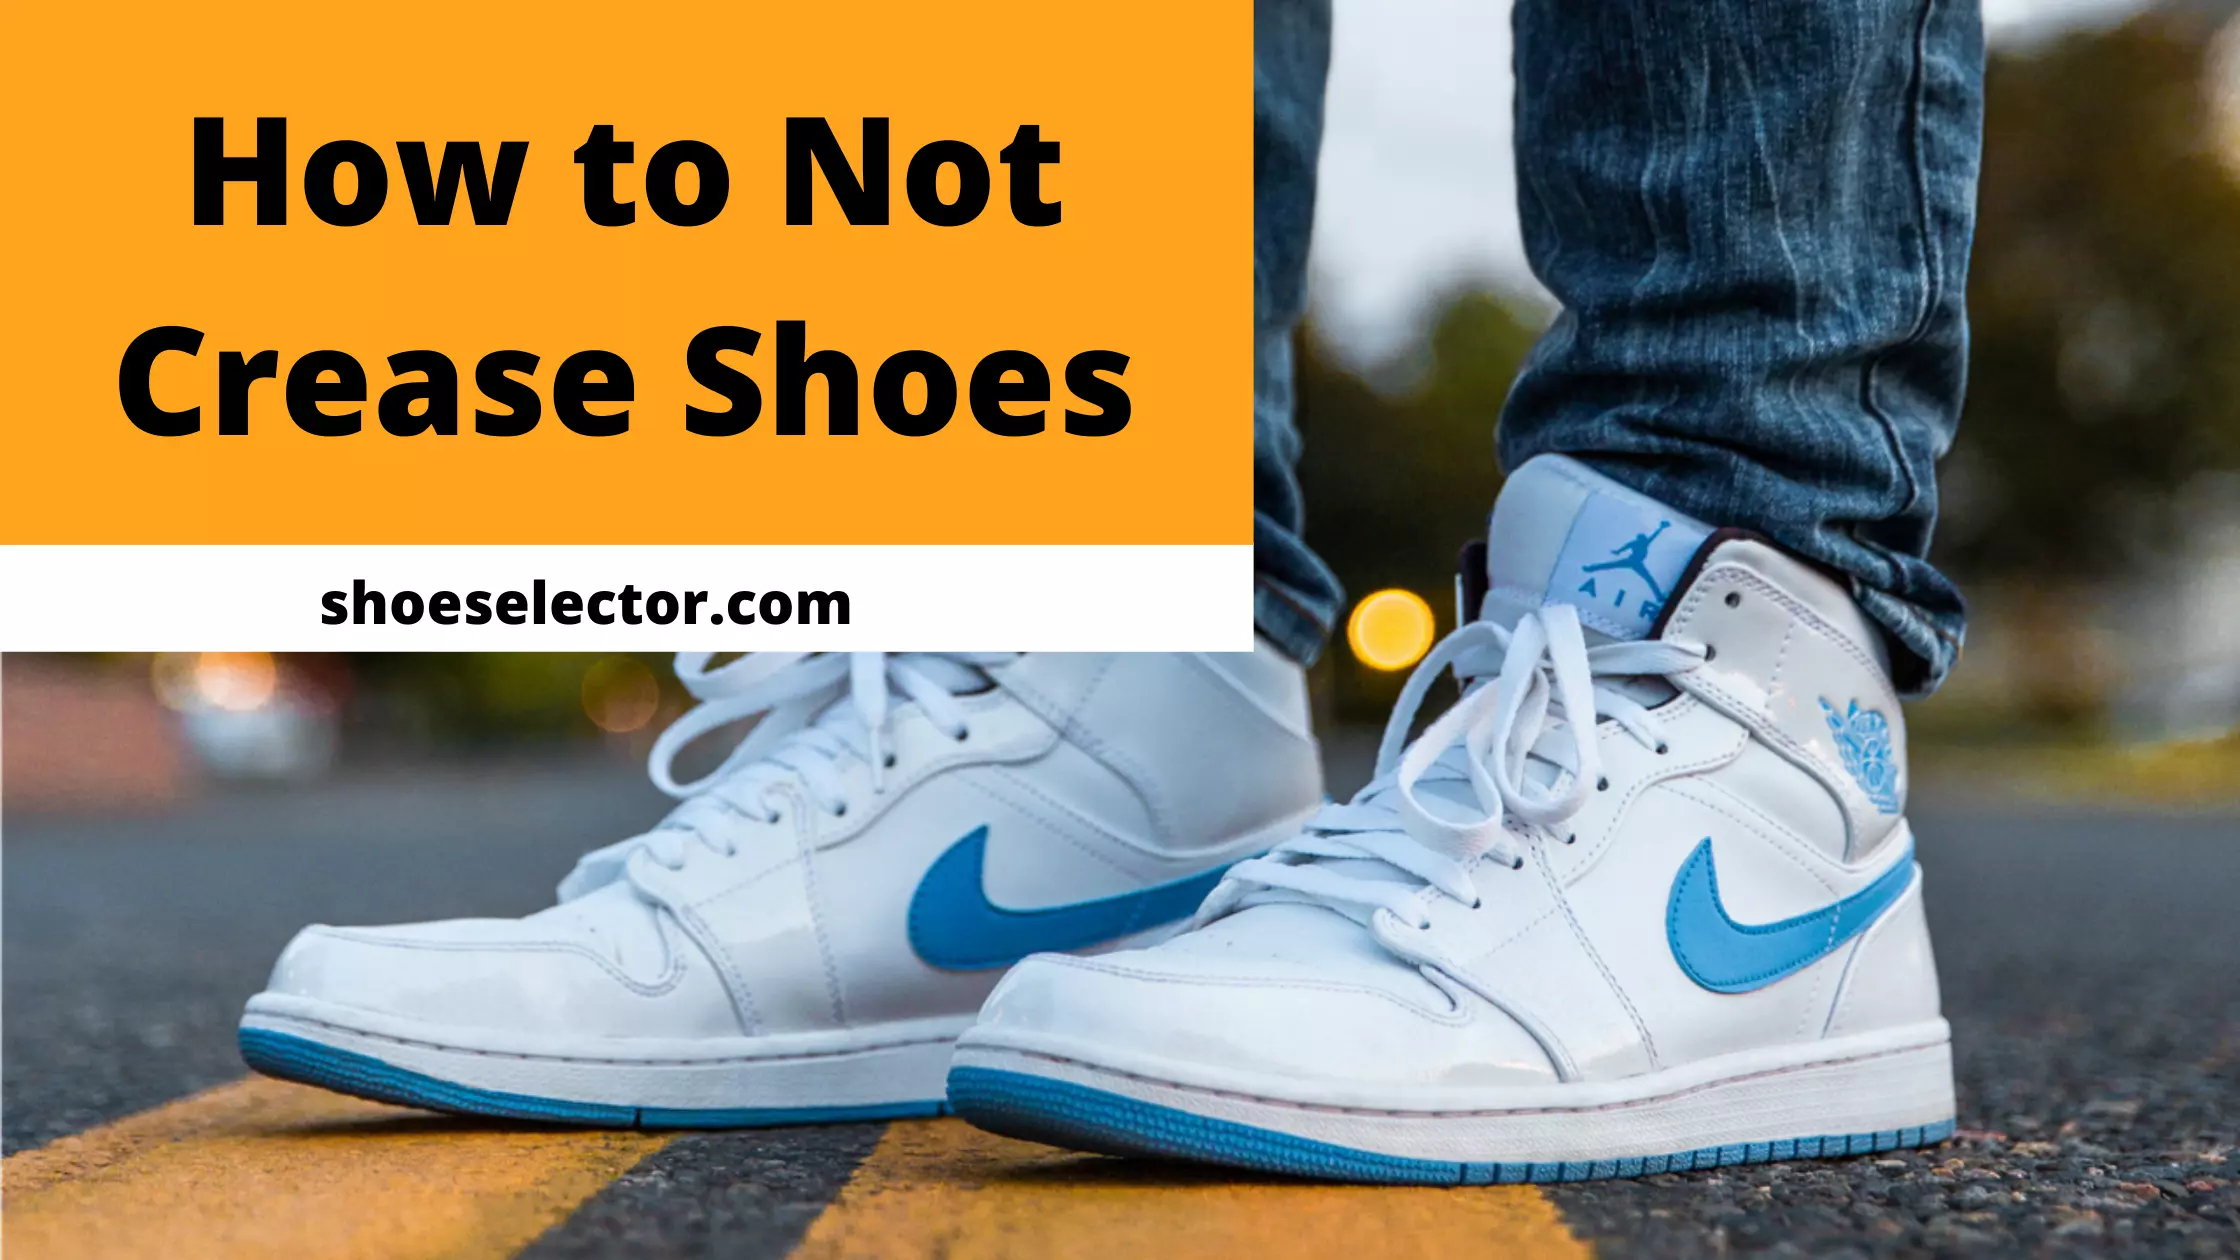 How To Not Crease Your Shoes While Walking? - Simple Guide